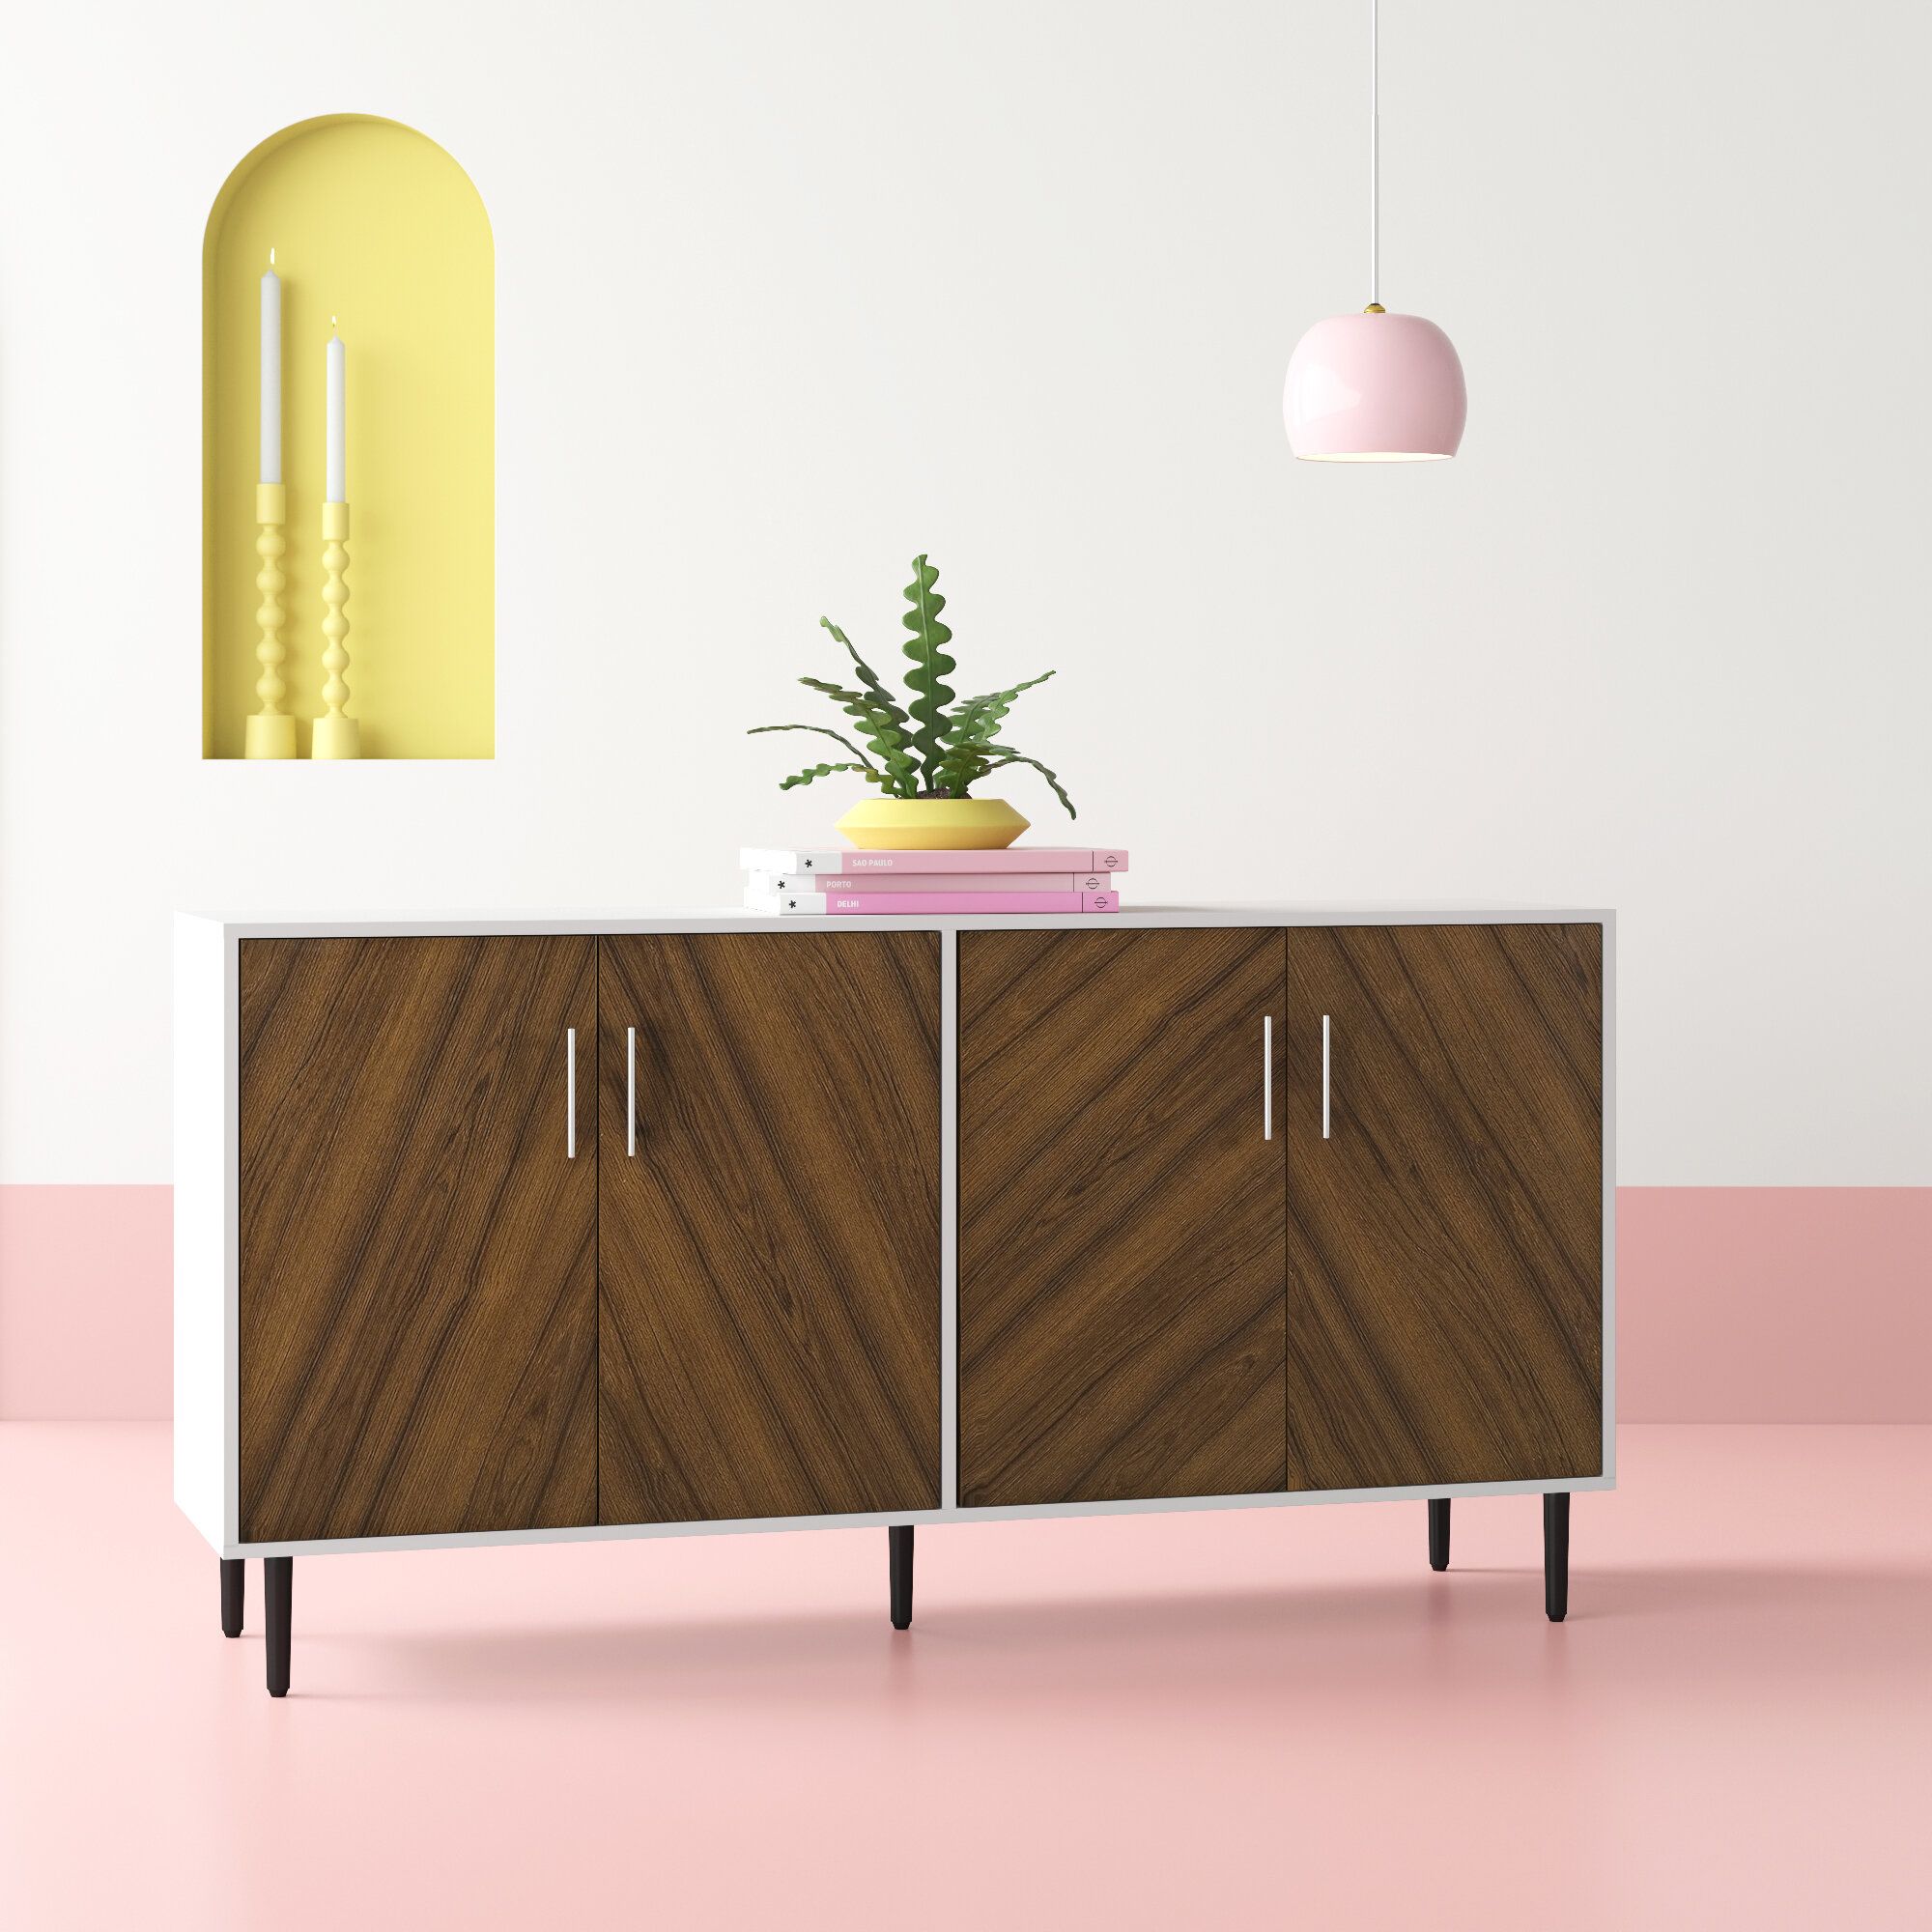 Light Wood Sideboard | Wayfair With Most Recent Arminta Wood Sideboards (View 4 of 20)